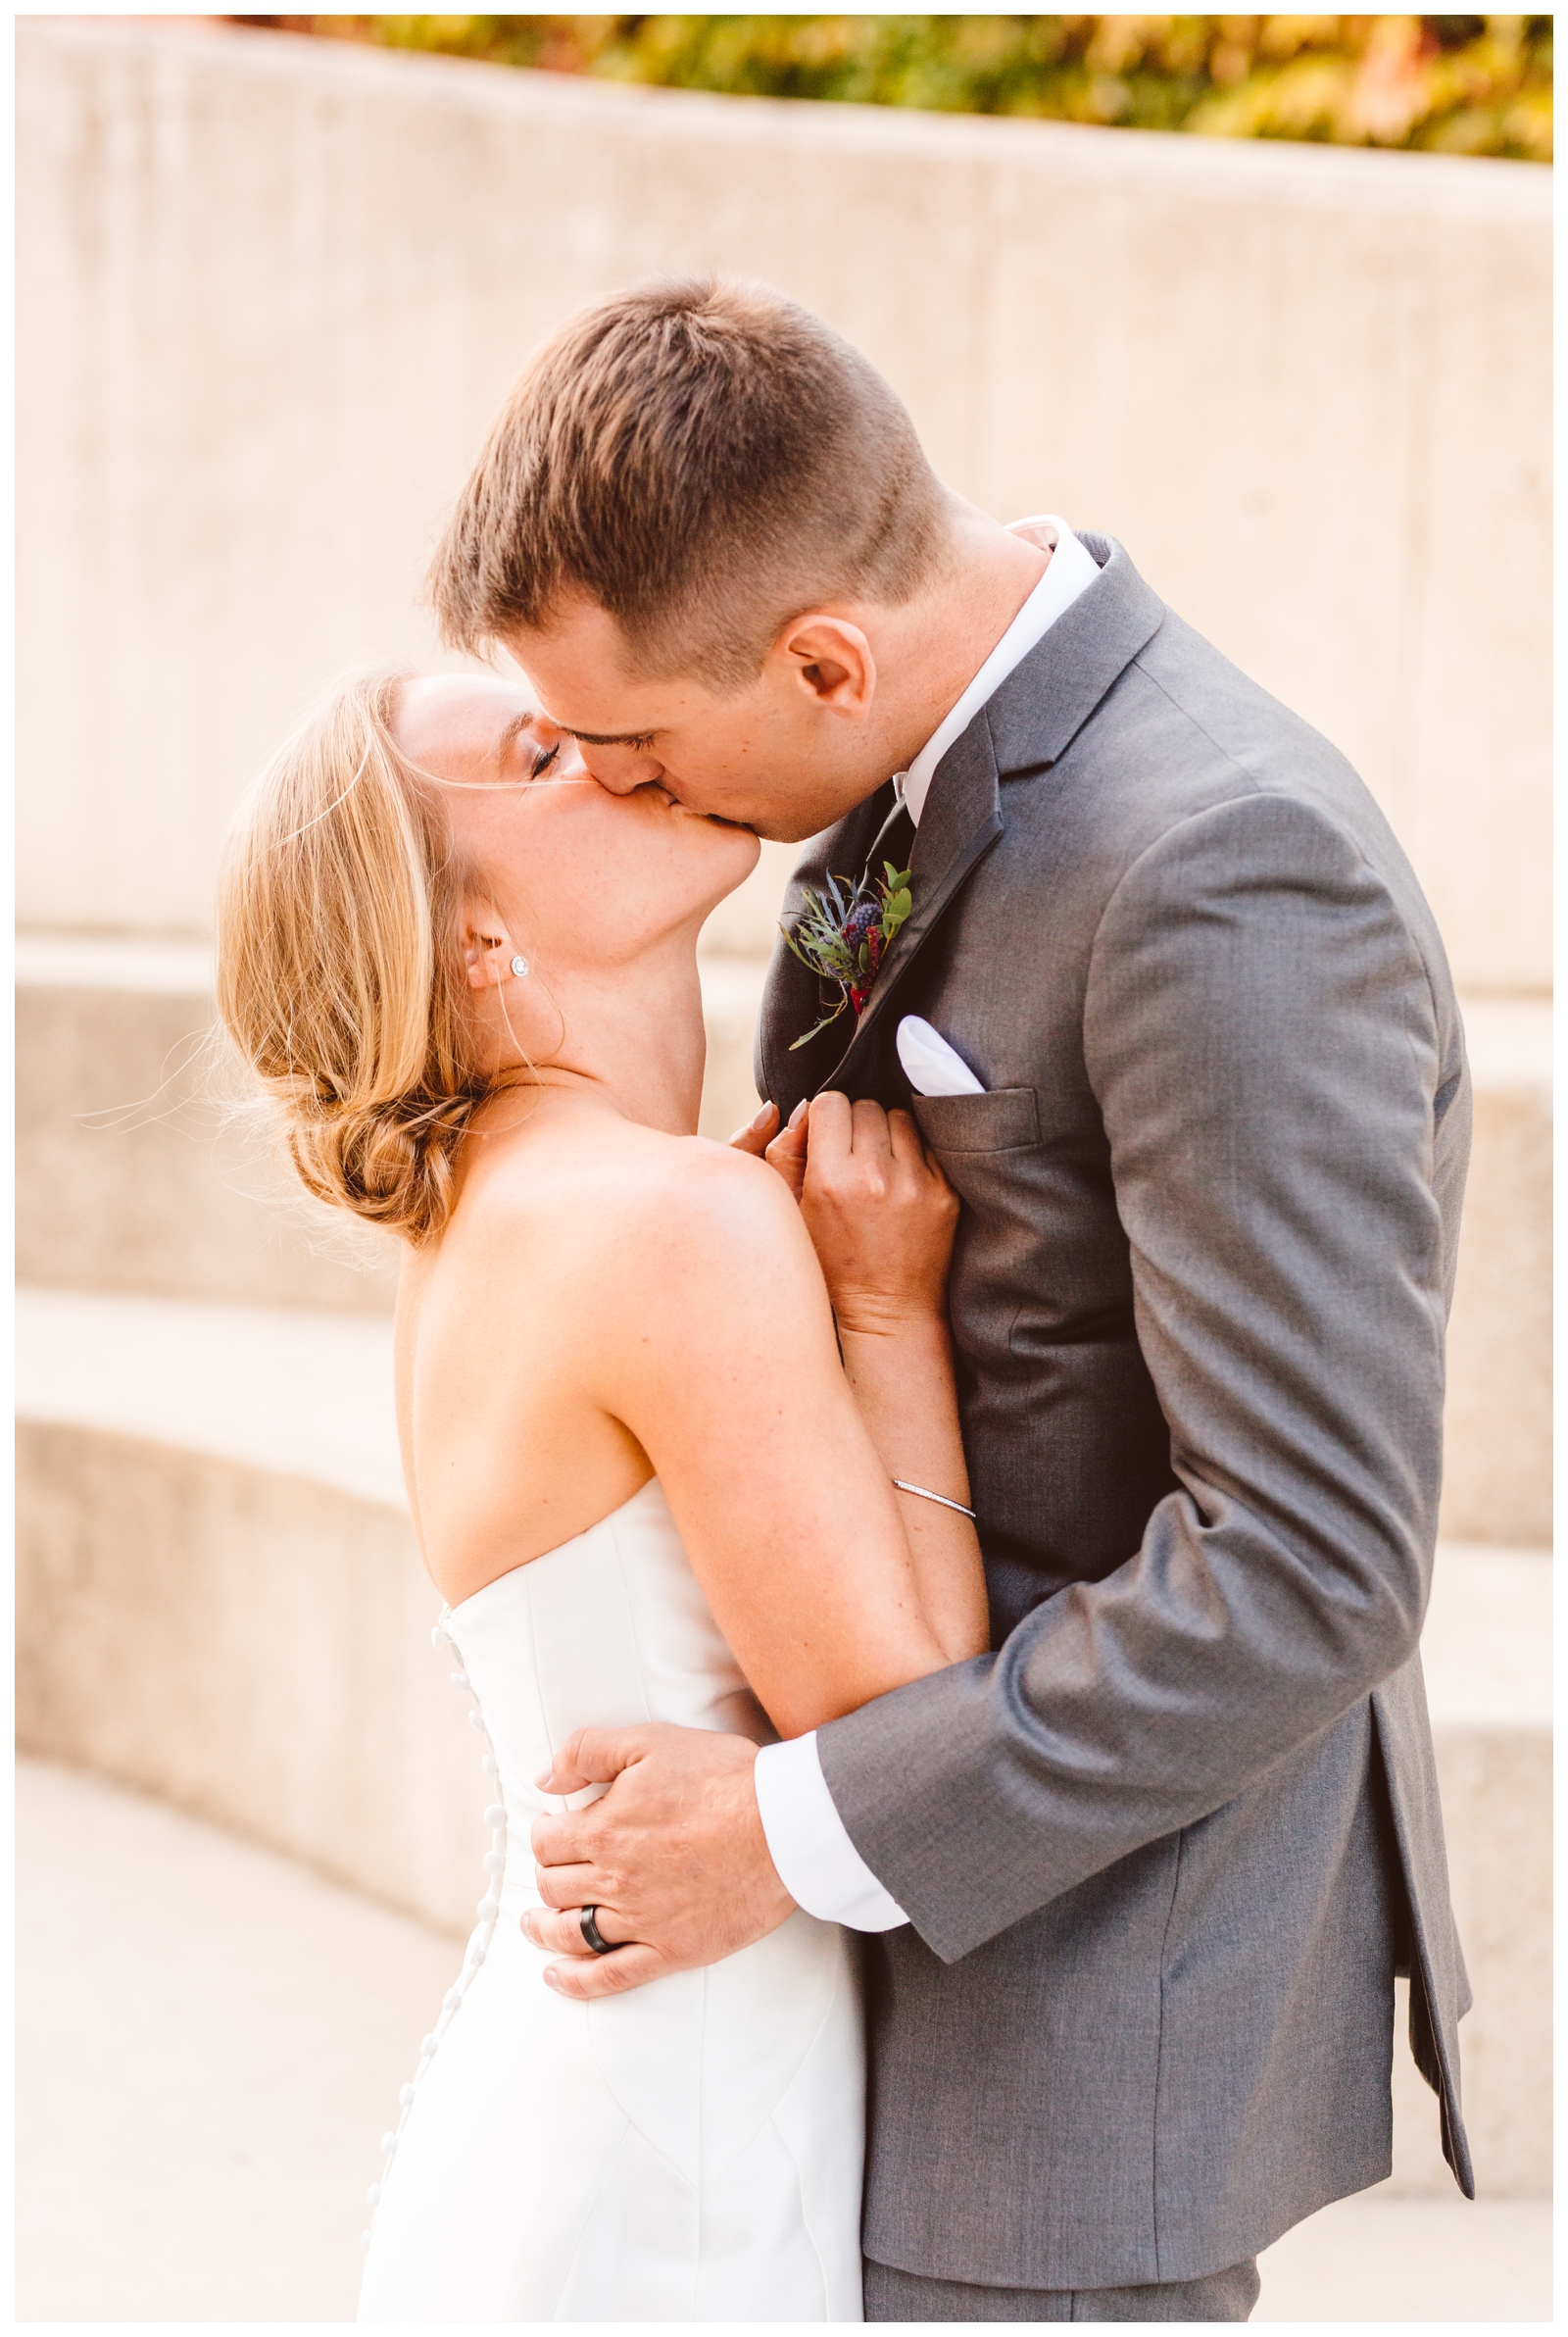 Loyola and AVAM Fall Wedding Inspiration - Baltimore Maryland Wedding by Brooke Michelle Photography